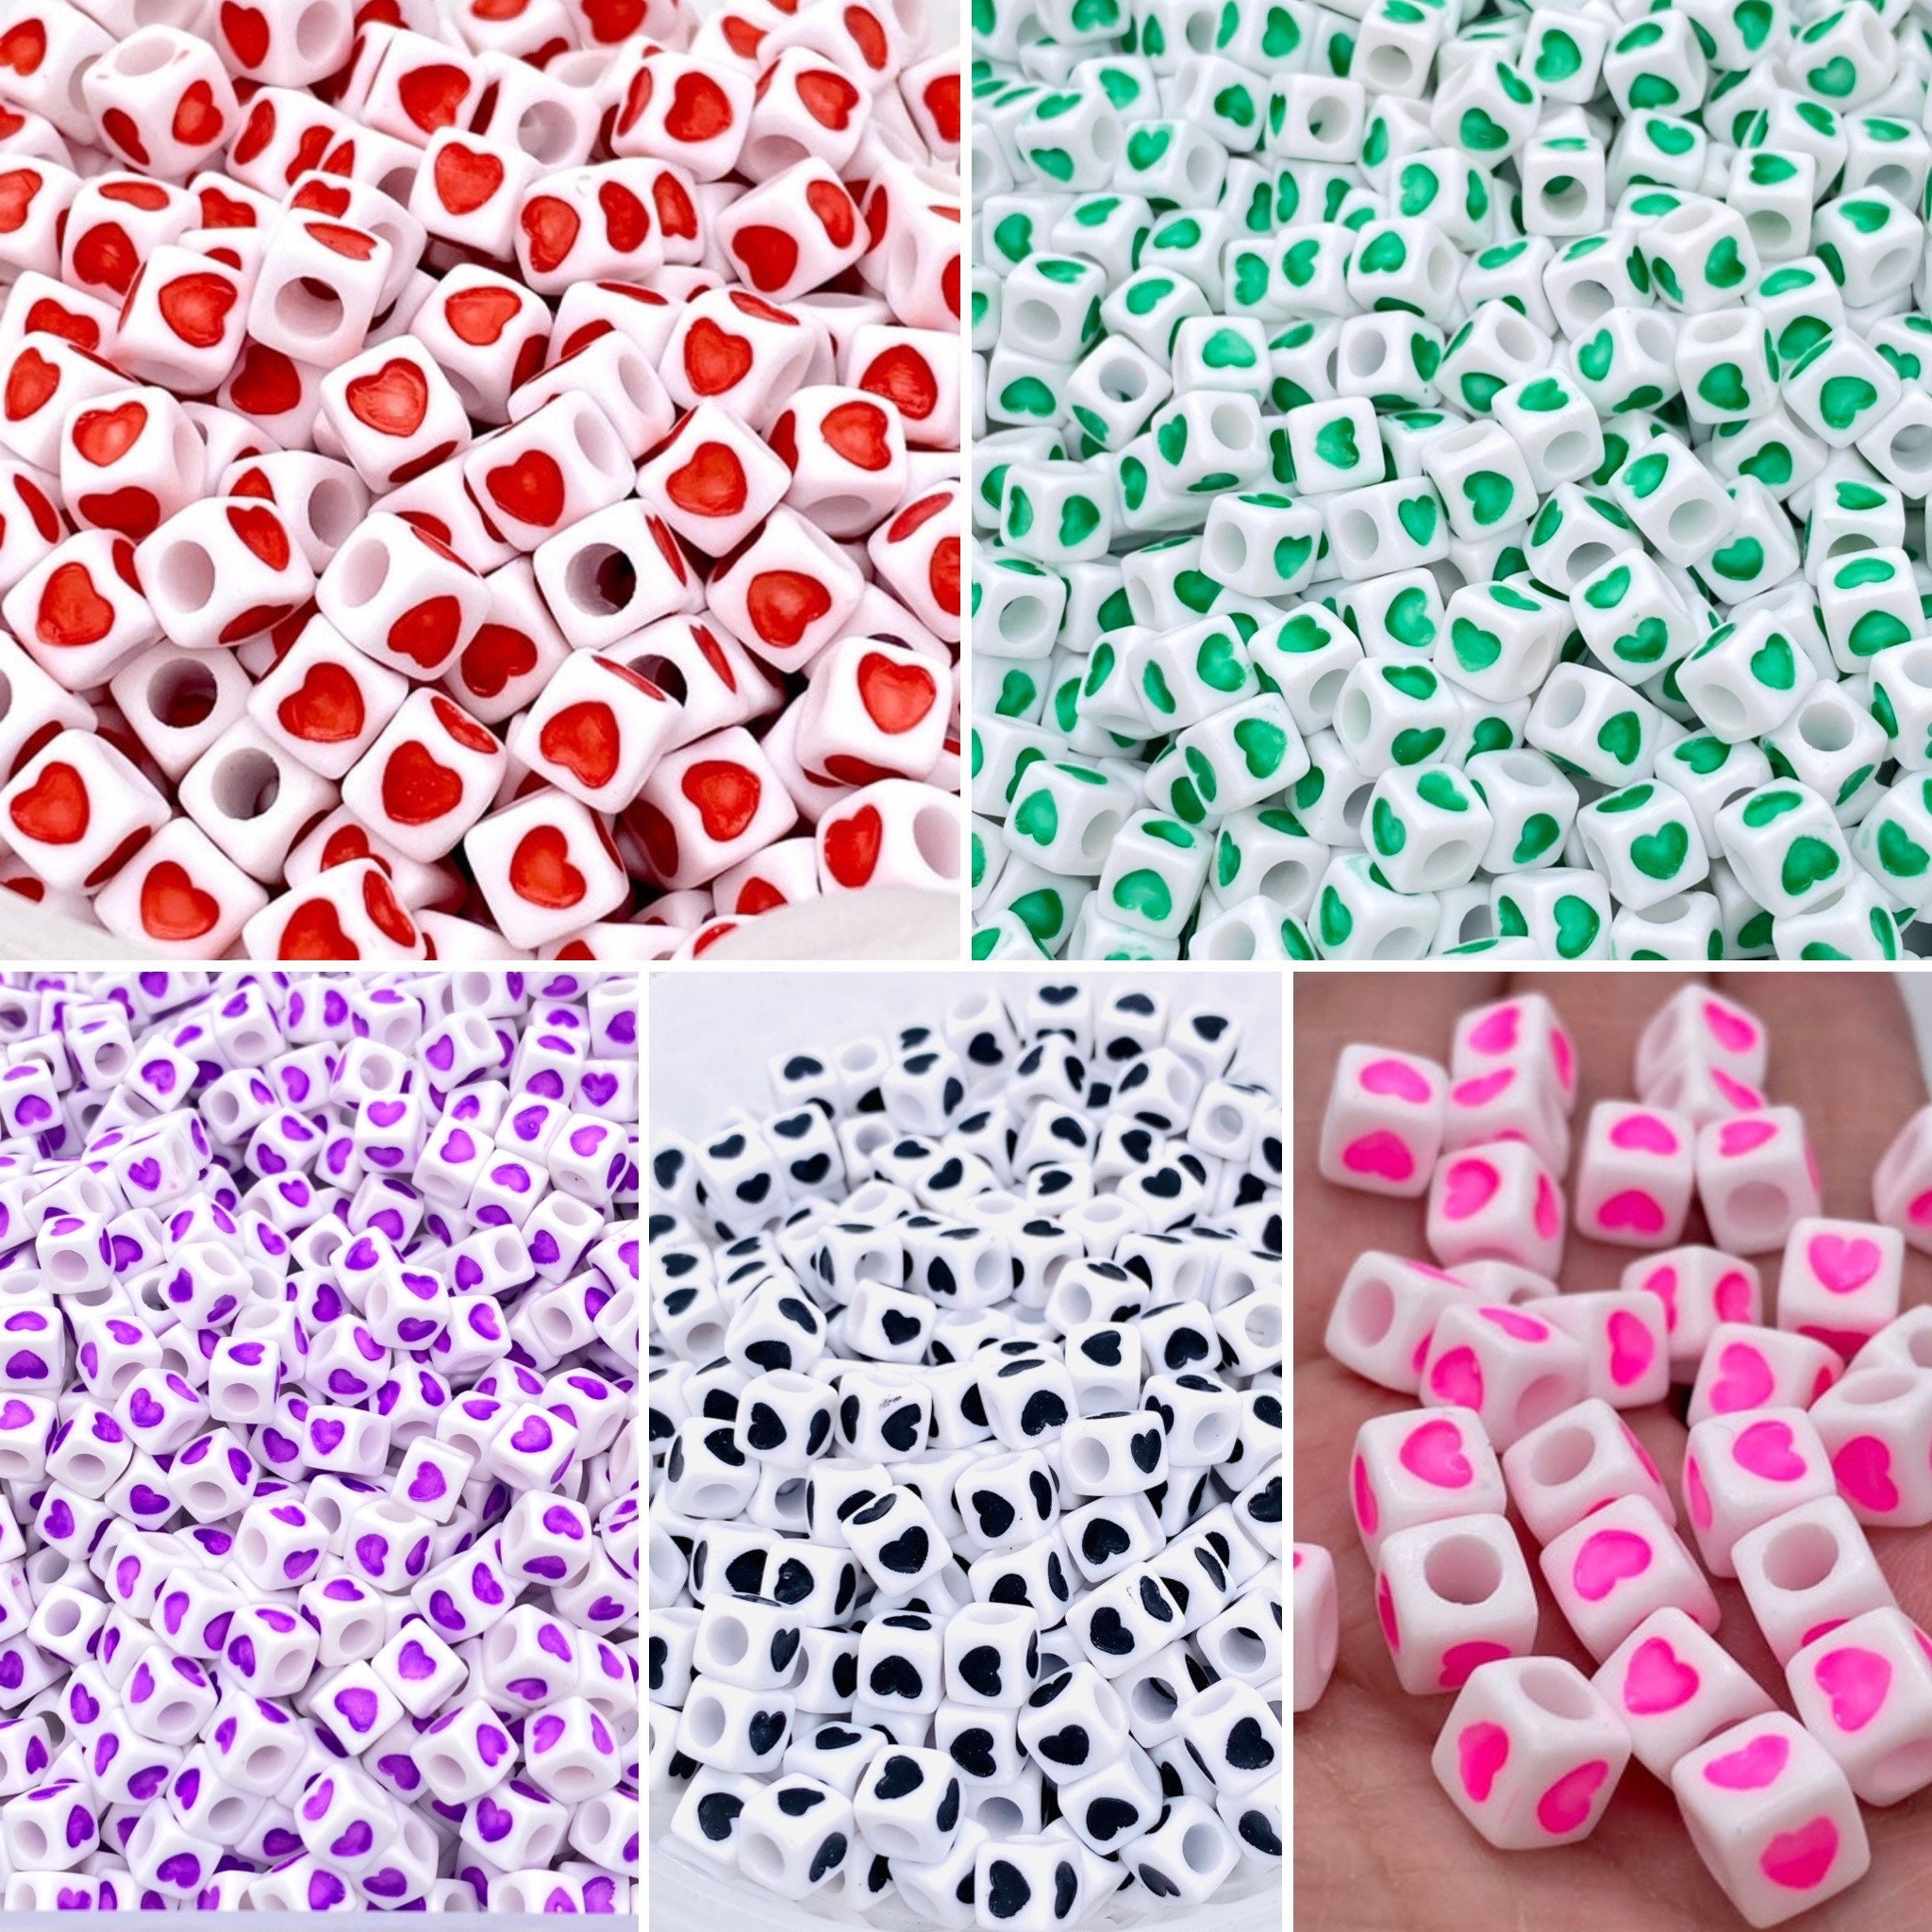 Red, White and Pink Heart Pony Beads, 10 x 12mm, 225 count